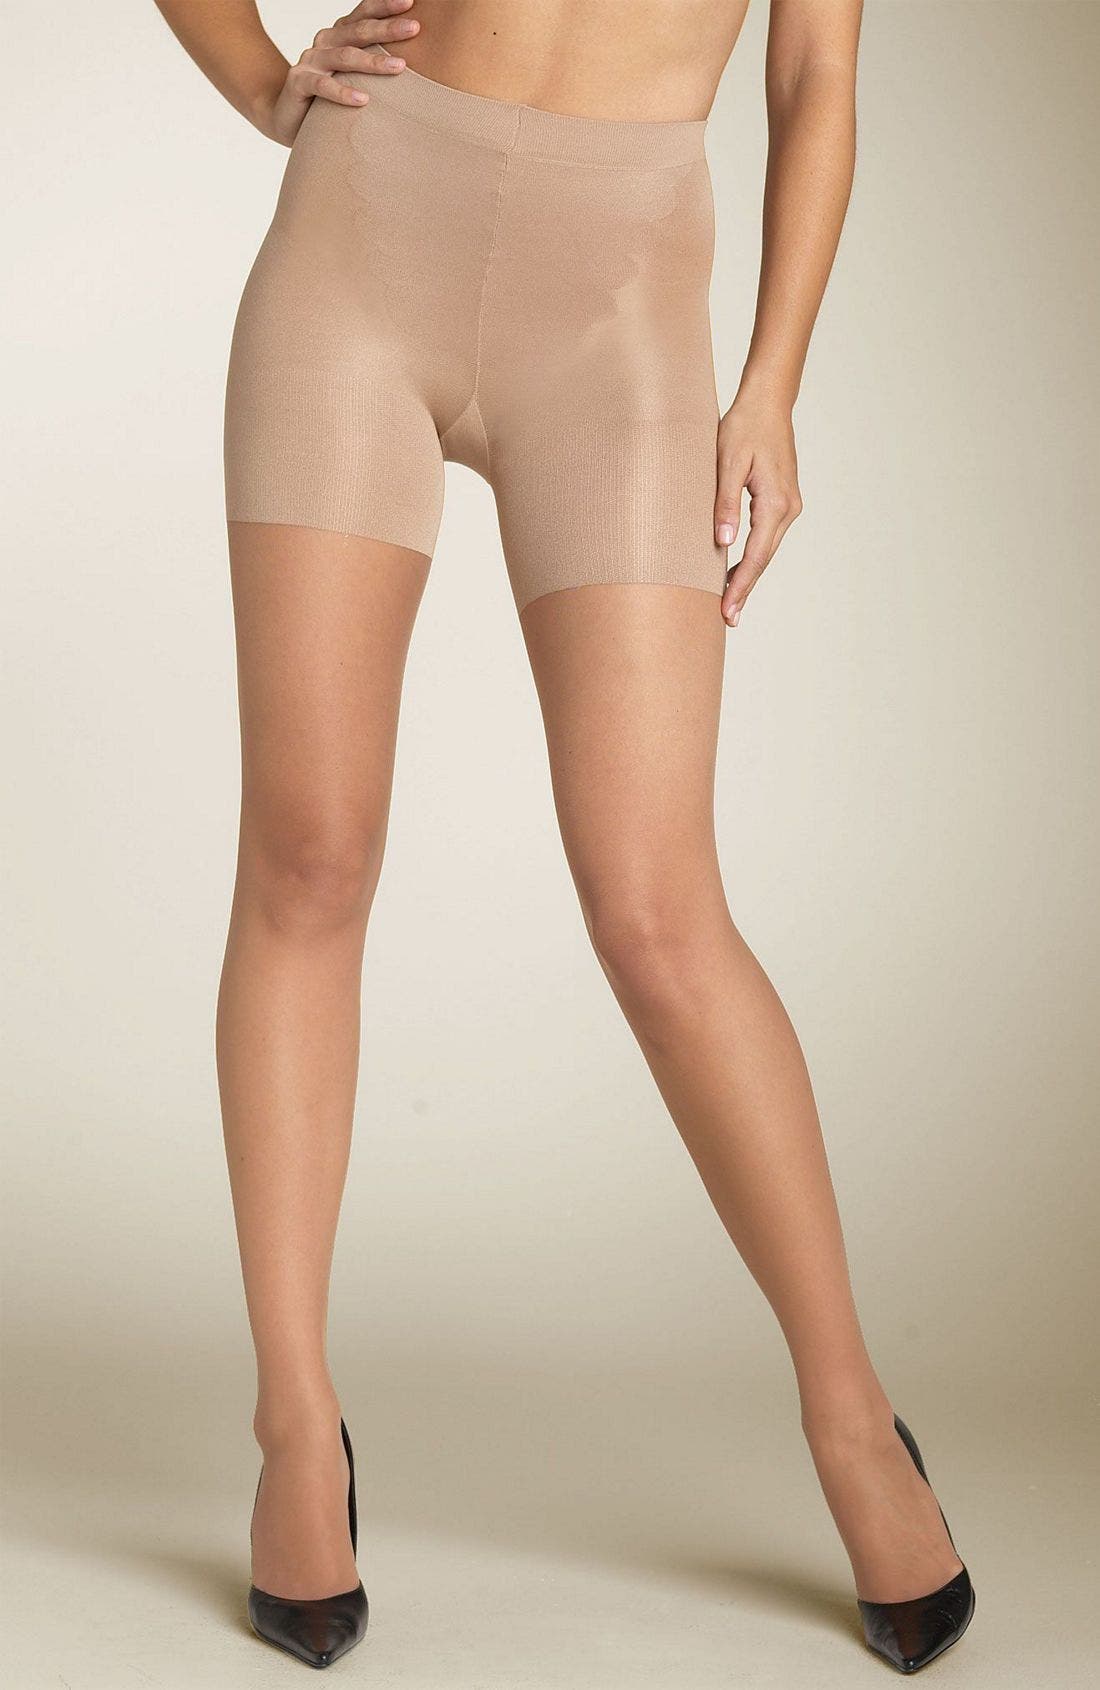 Spanx Womens All The Way Sheer Super Control Pantyhose